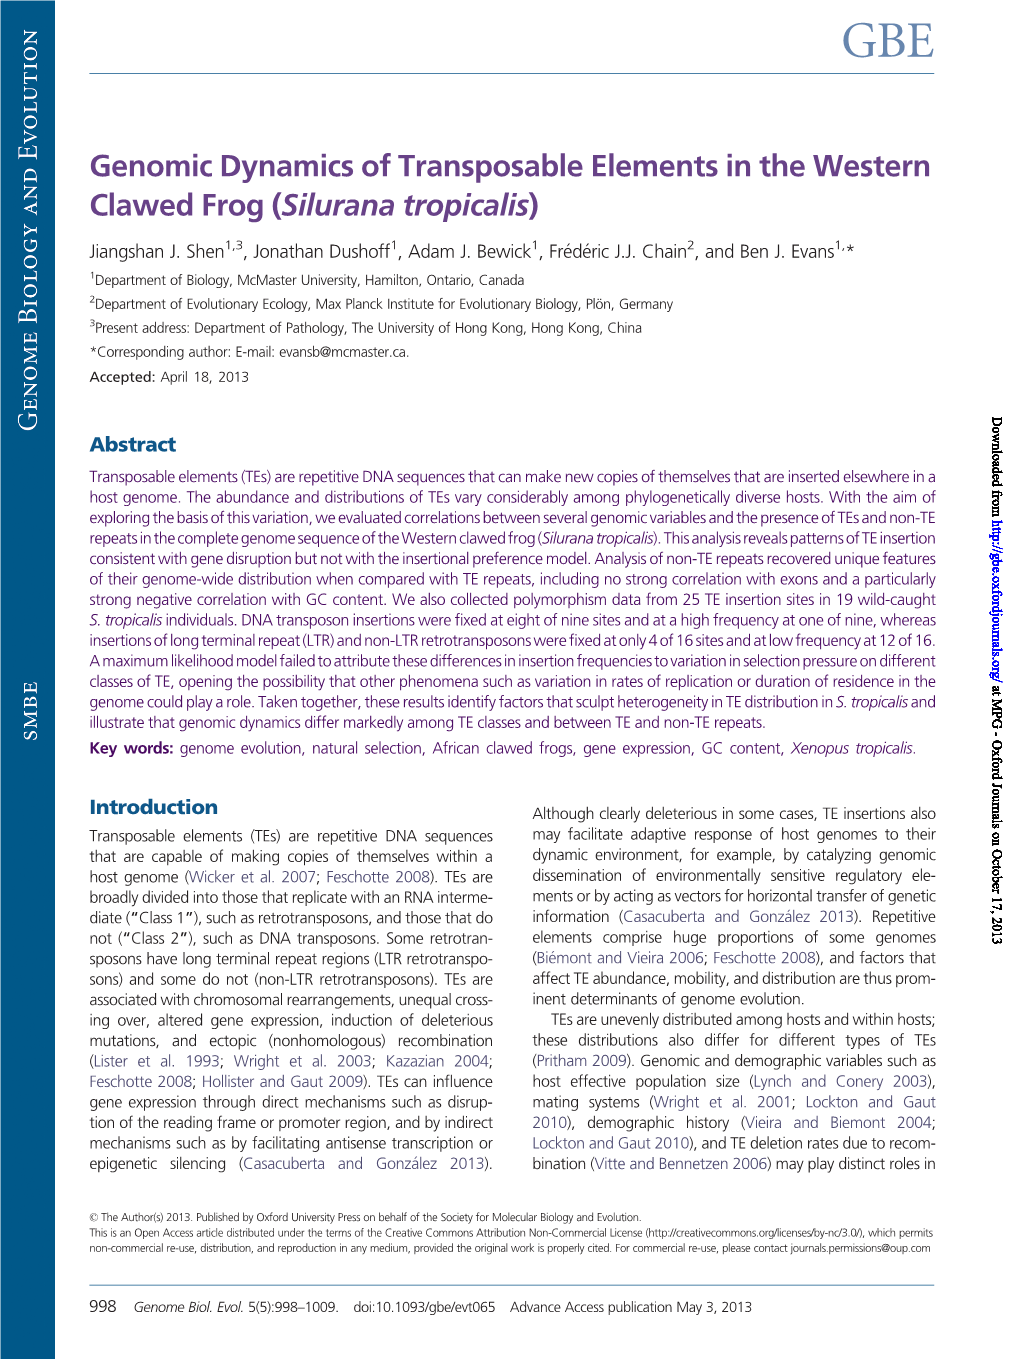 Genomic Dynamics of Transposable Elements in the Western Clawed Frog (Silurana Tropicalis)